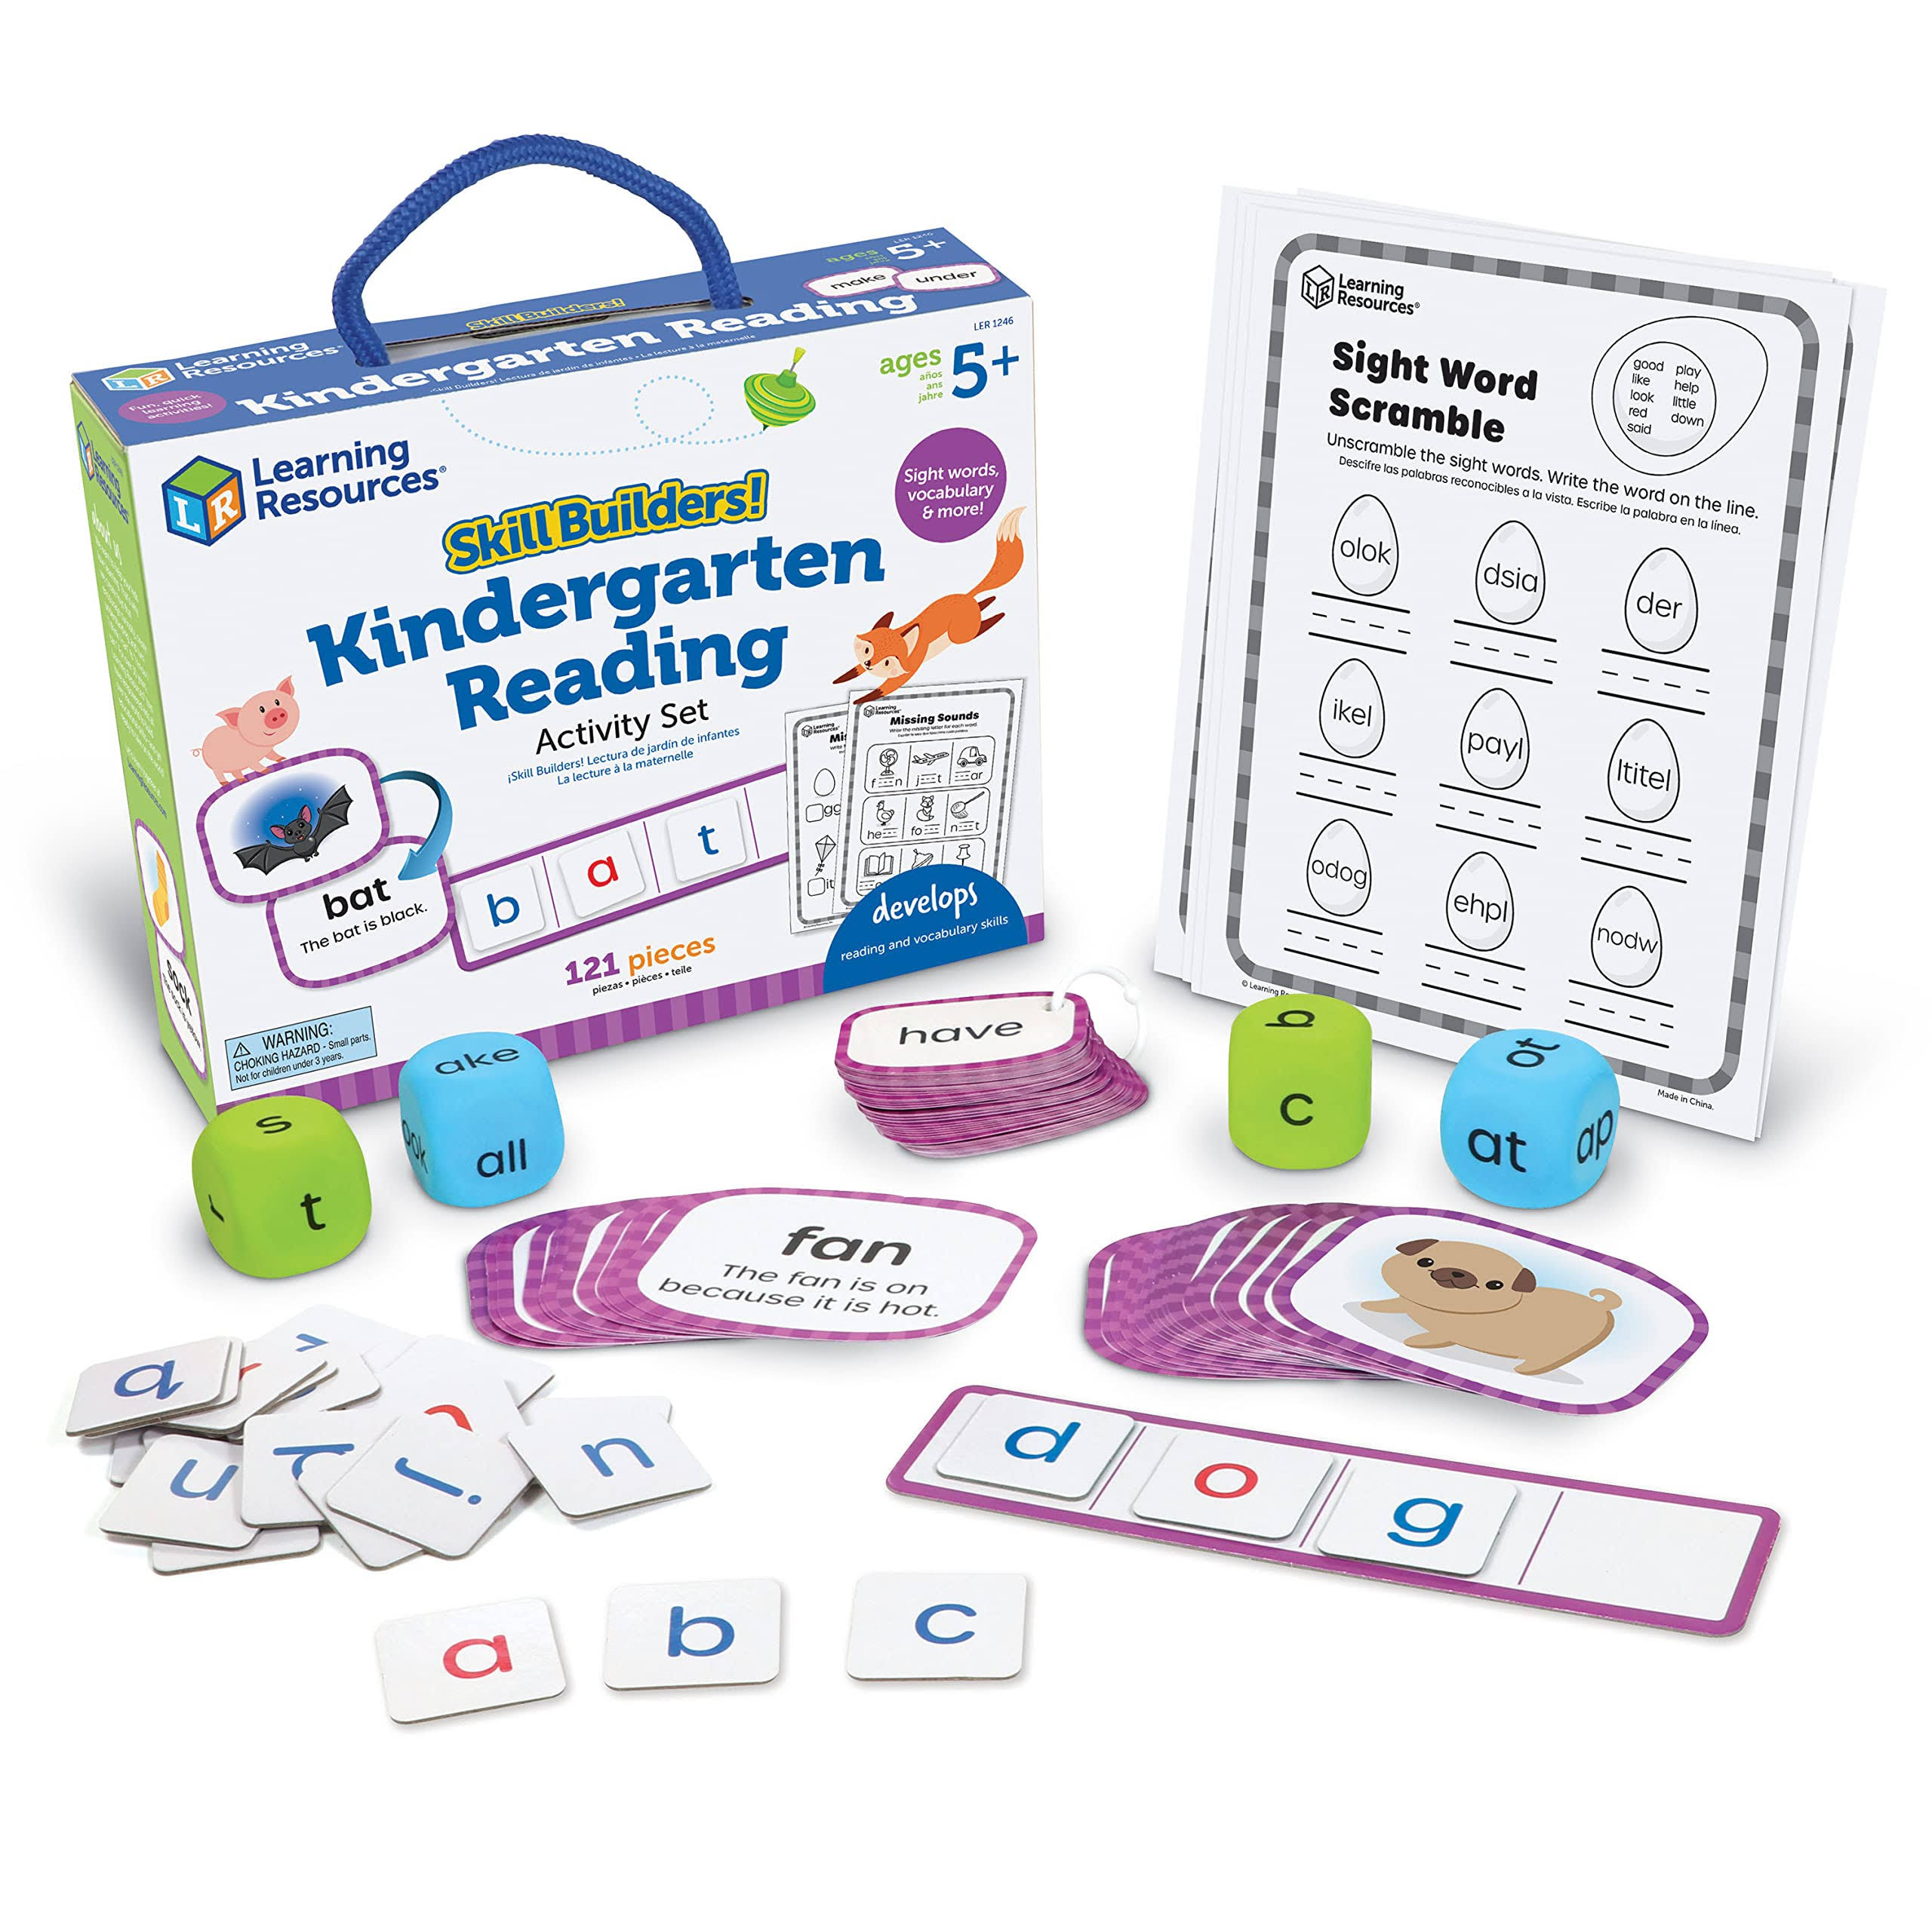 Learning Resources Skill Builders! Kindergarten Reading Activity Set - 122 Pieces, Ages 5+ Kindergarten Learning Essential Materials, Reading